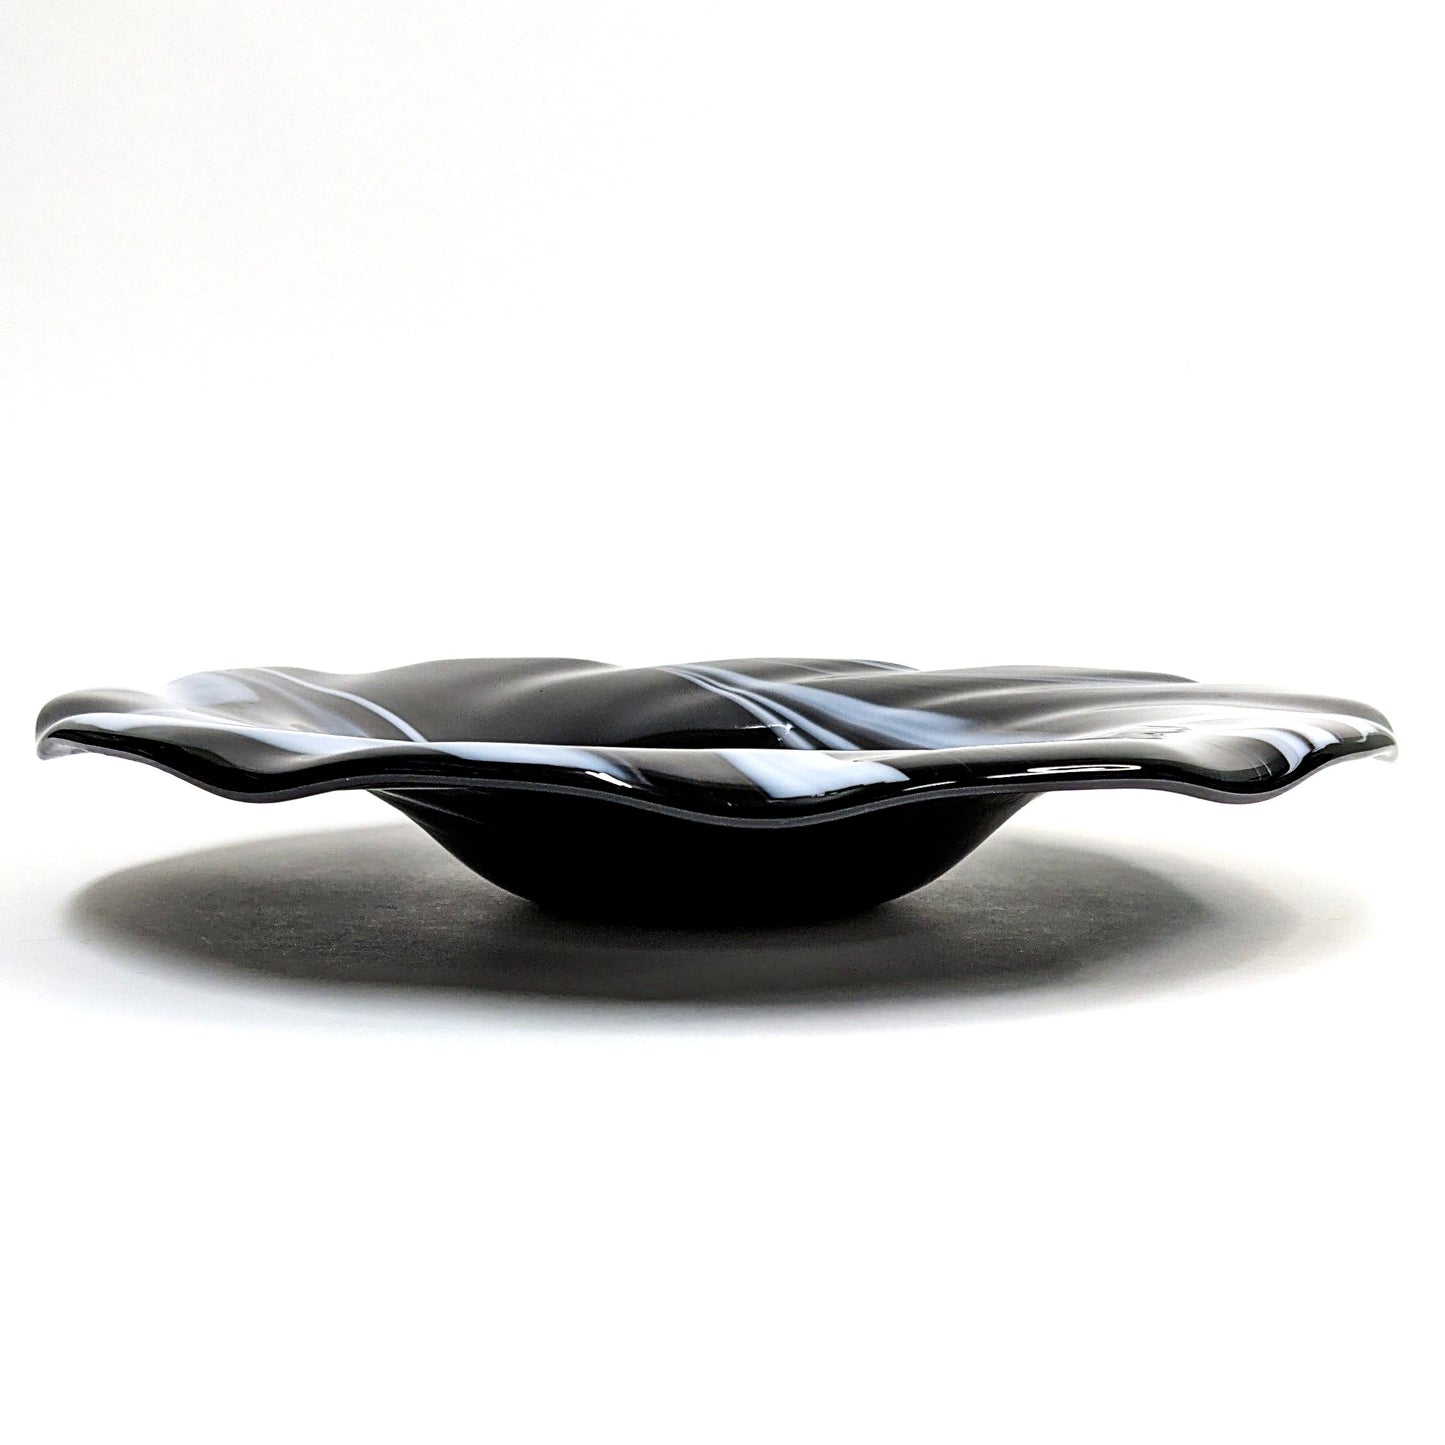 Contemporary Glass Art Bowl in Black and White